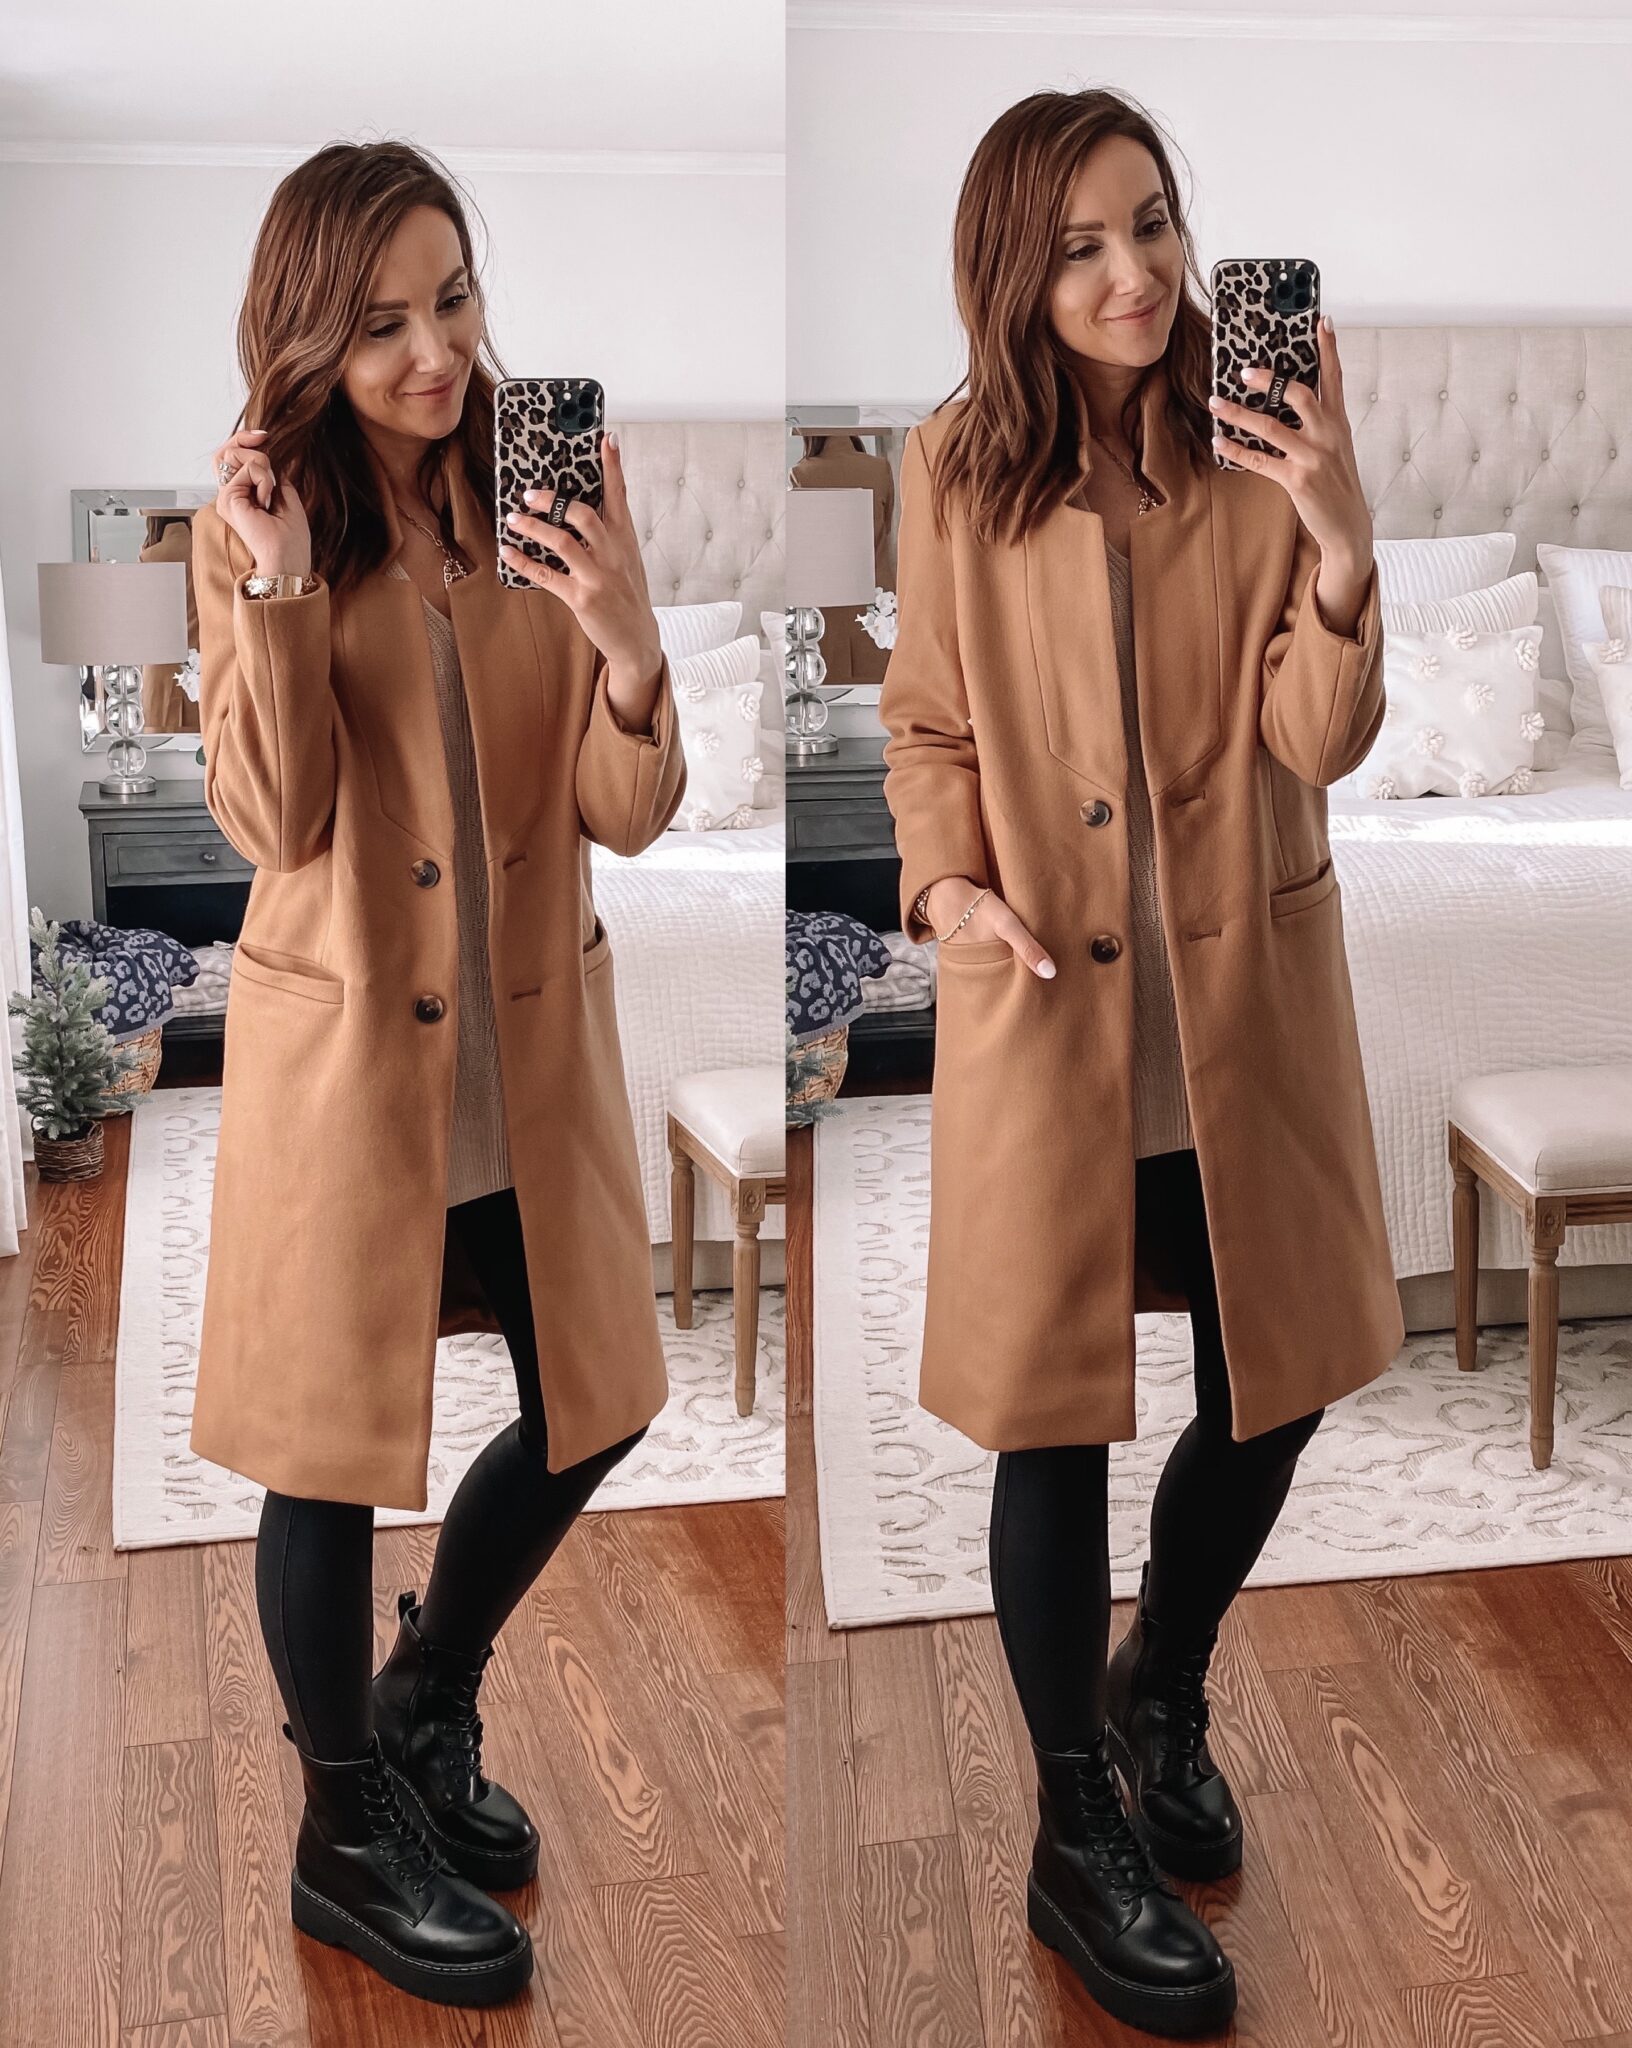 old navy camel coat, faux leather leggings, combat boots